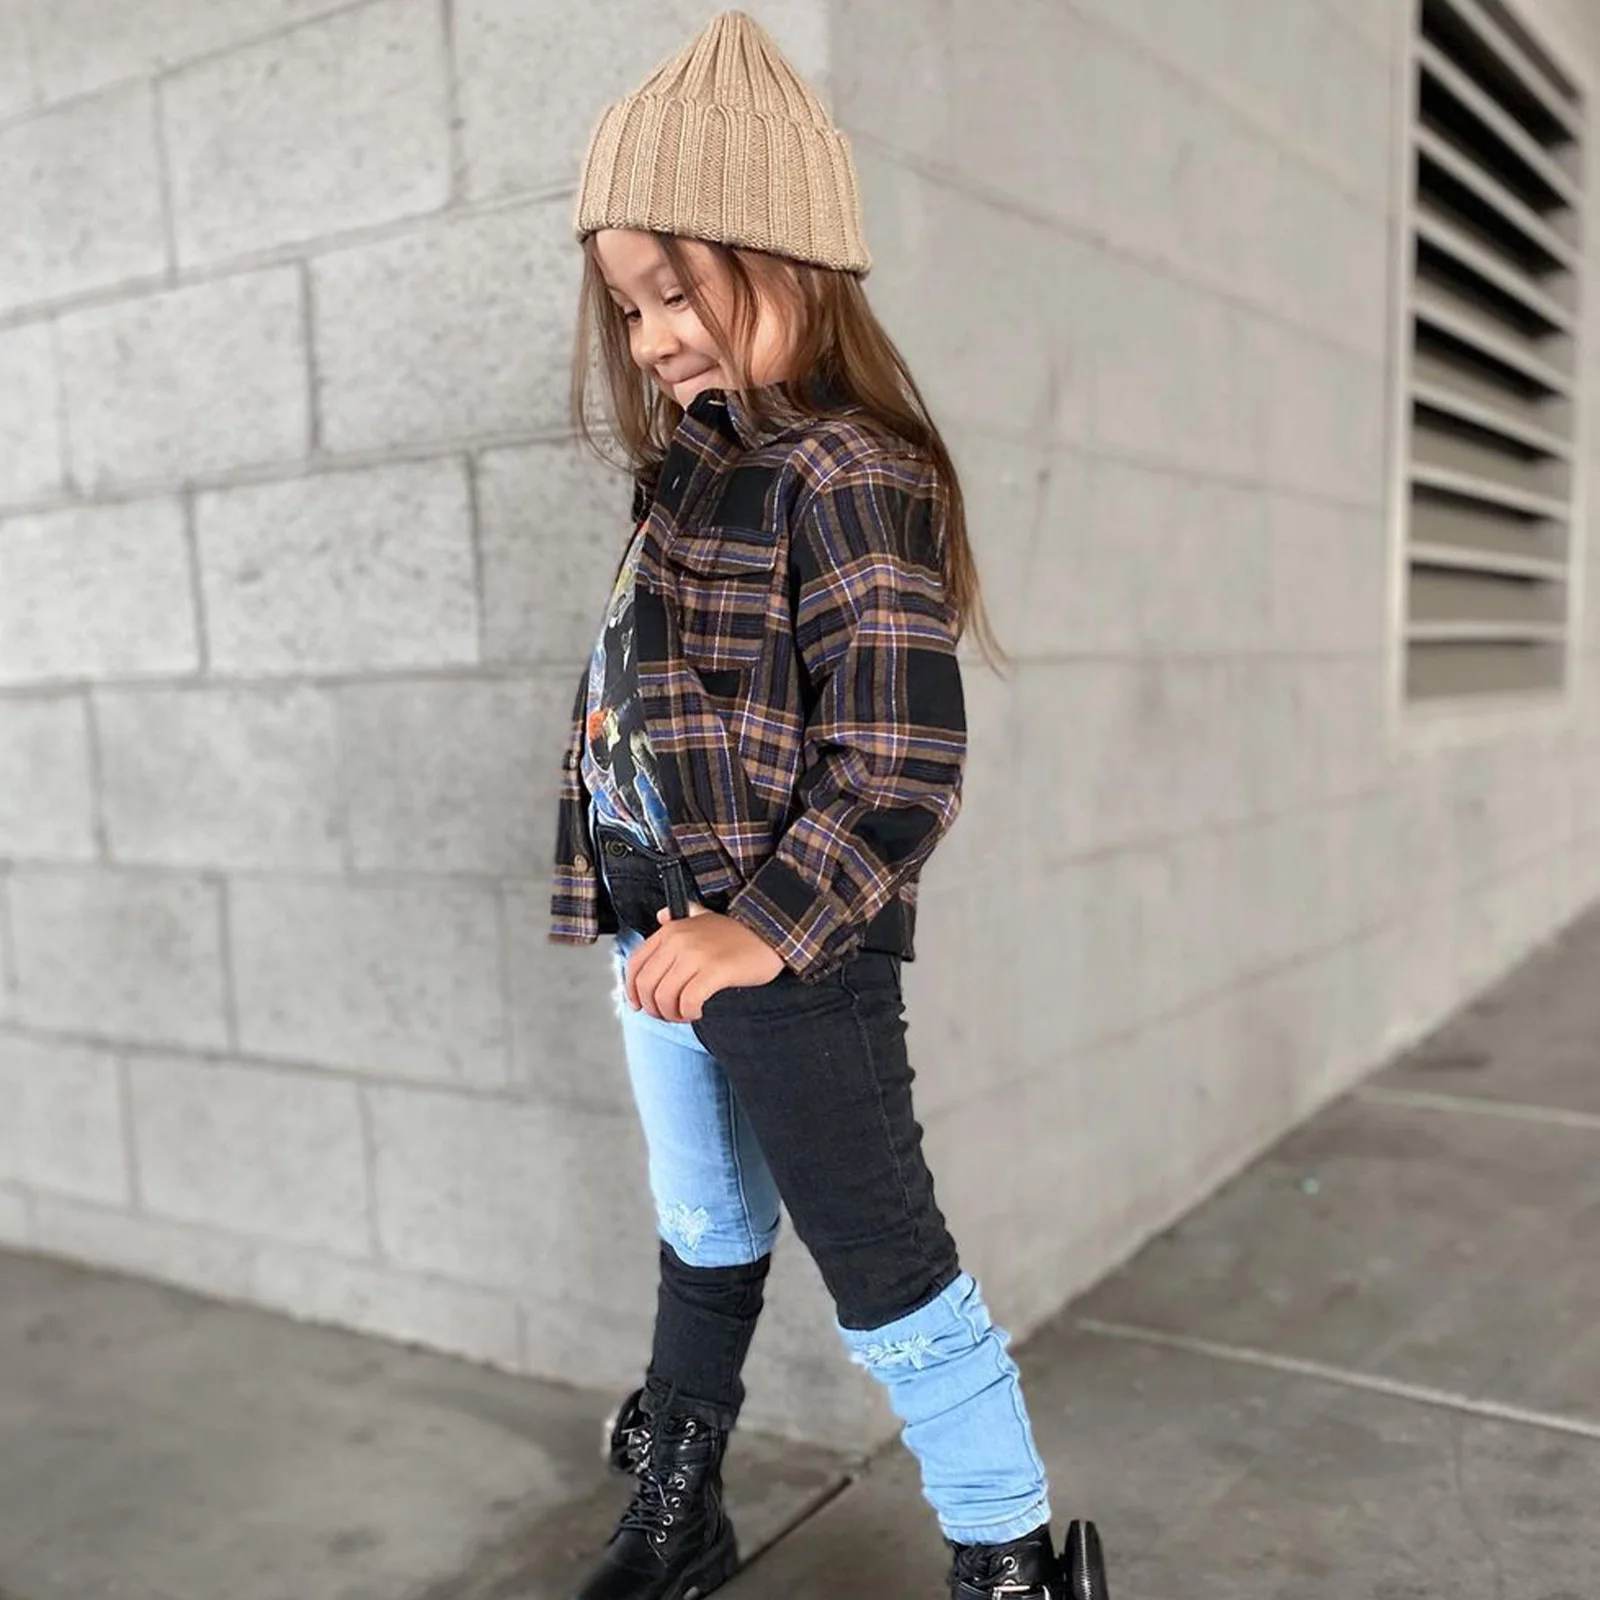 Toddler Baby Girls Long Sleeve Shirt Plaid T-Shirt Dress Button Down Jacket Winter Coat for GILR Christmas Outfits 